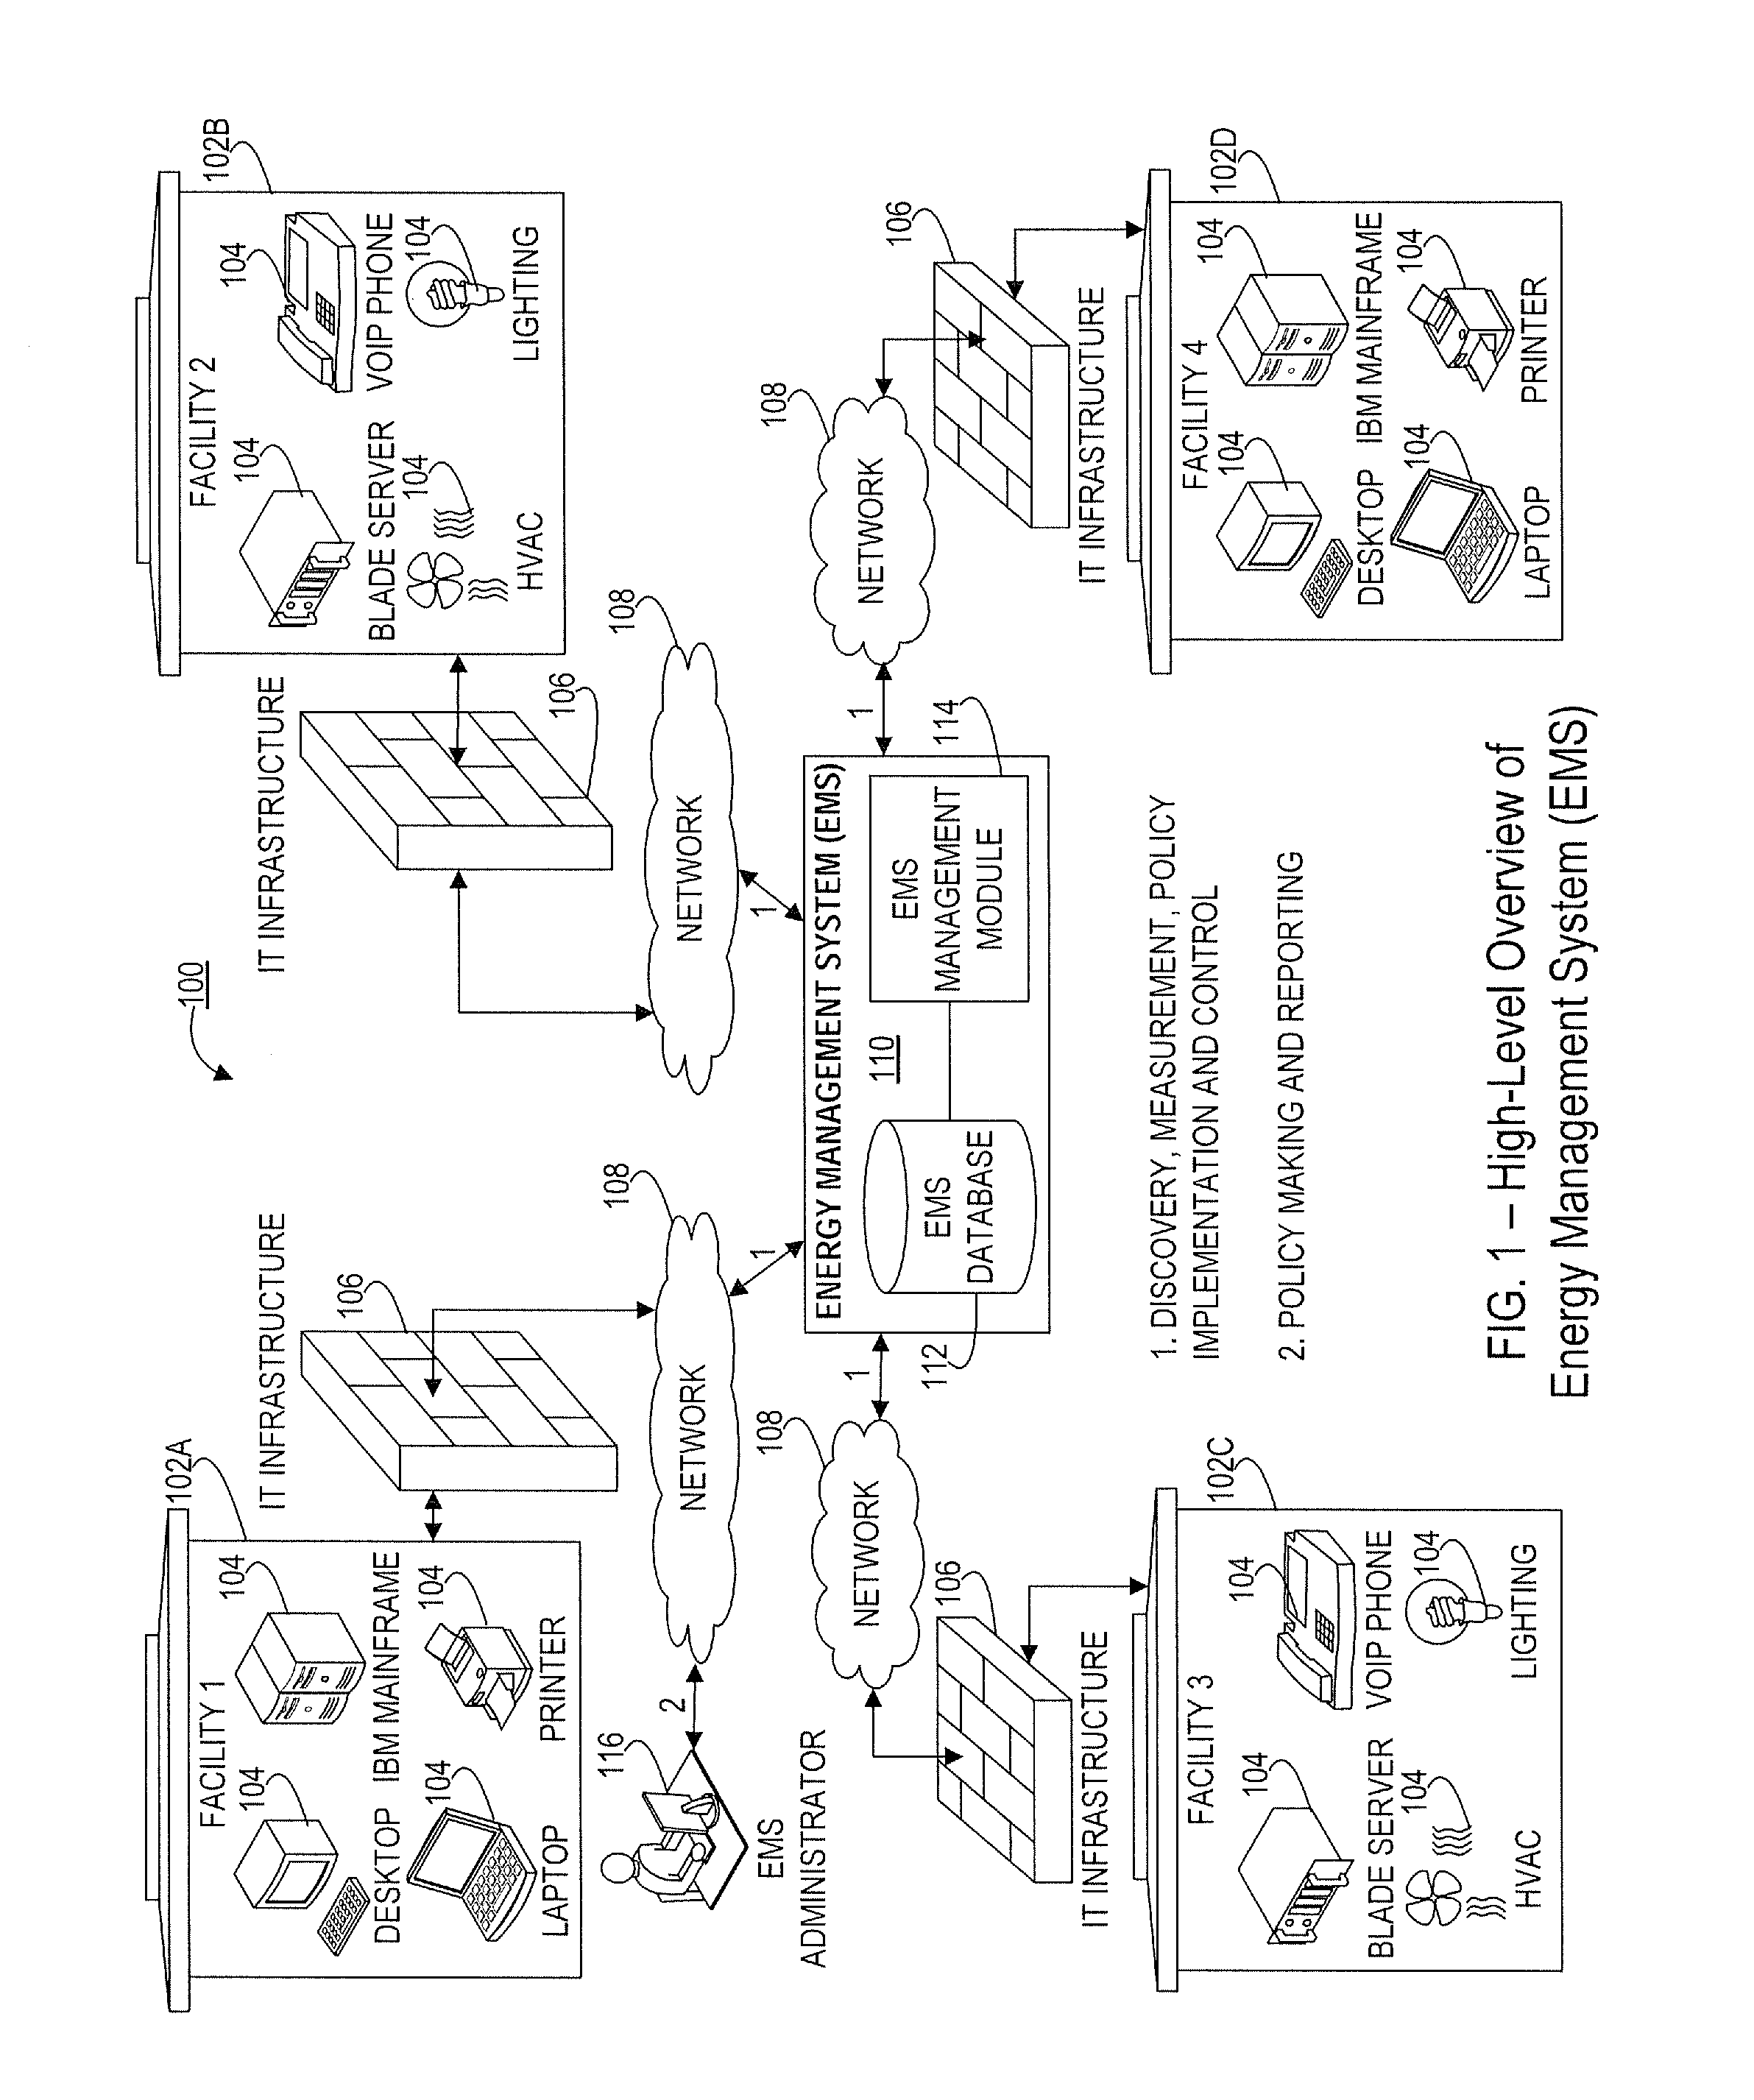 System and methods for automatic power management of remote electronic devices using a mobile device